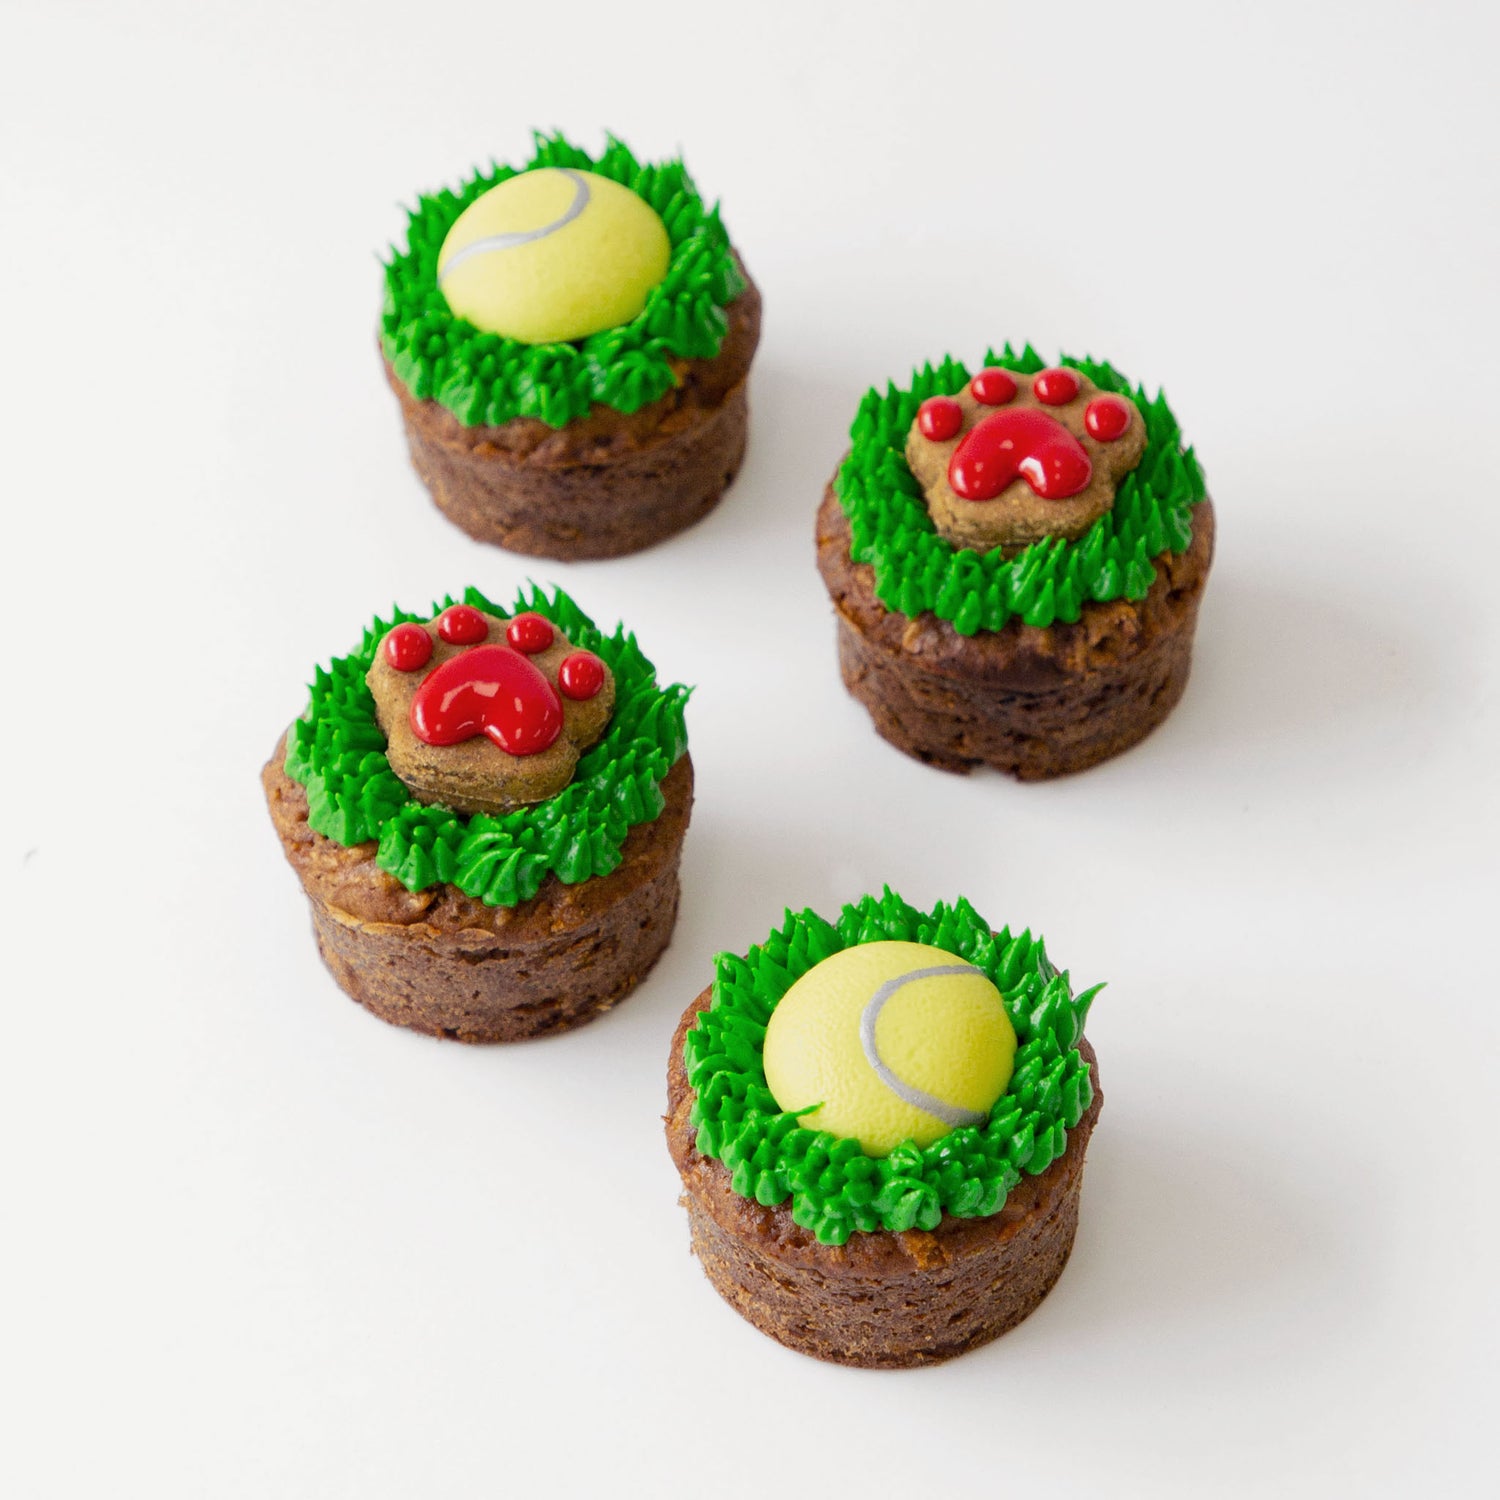 Tennis Ball Dog Cupcakes Pupcakes Puppy Cakes in Red